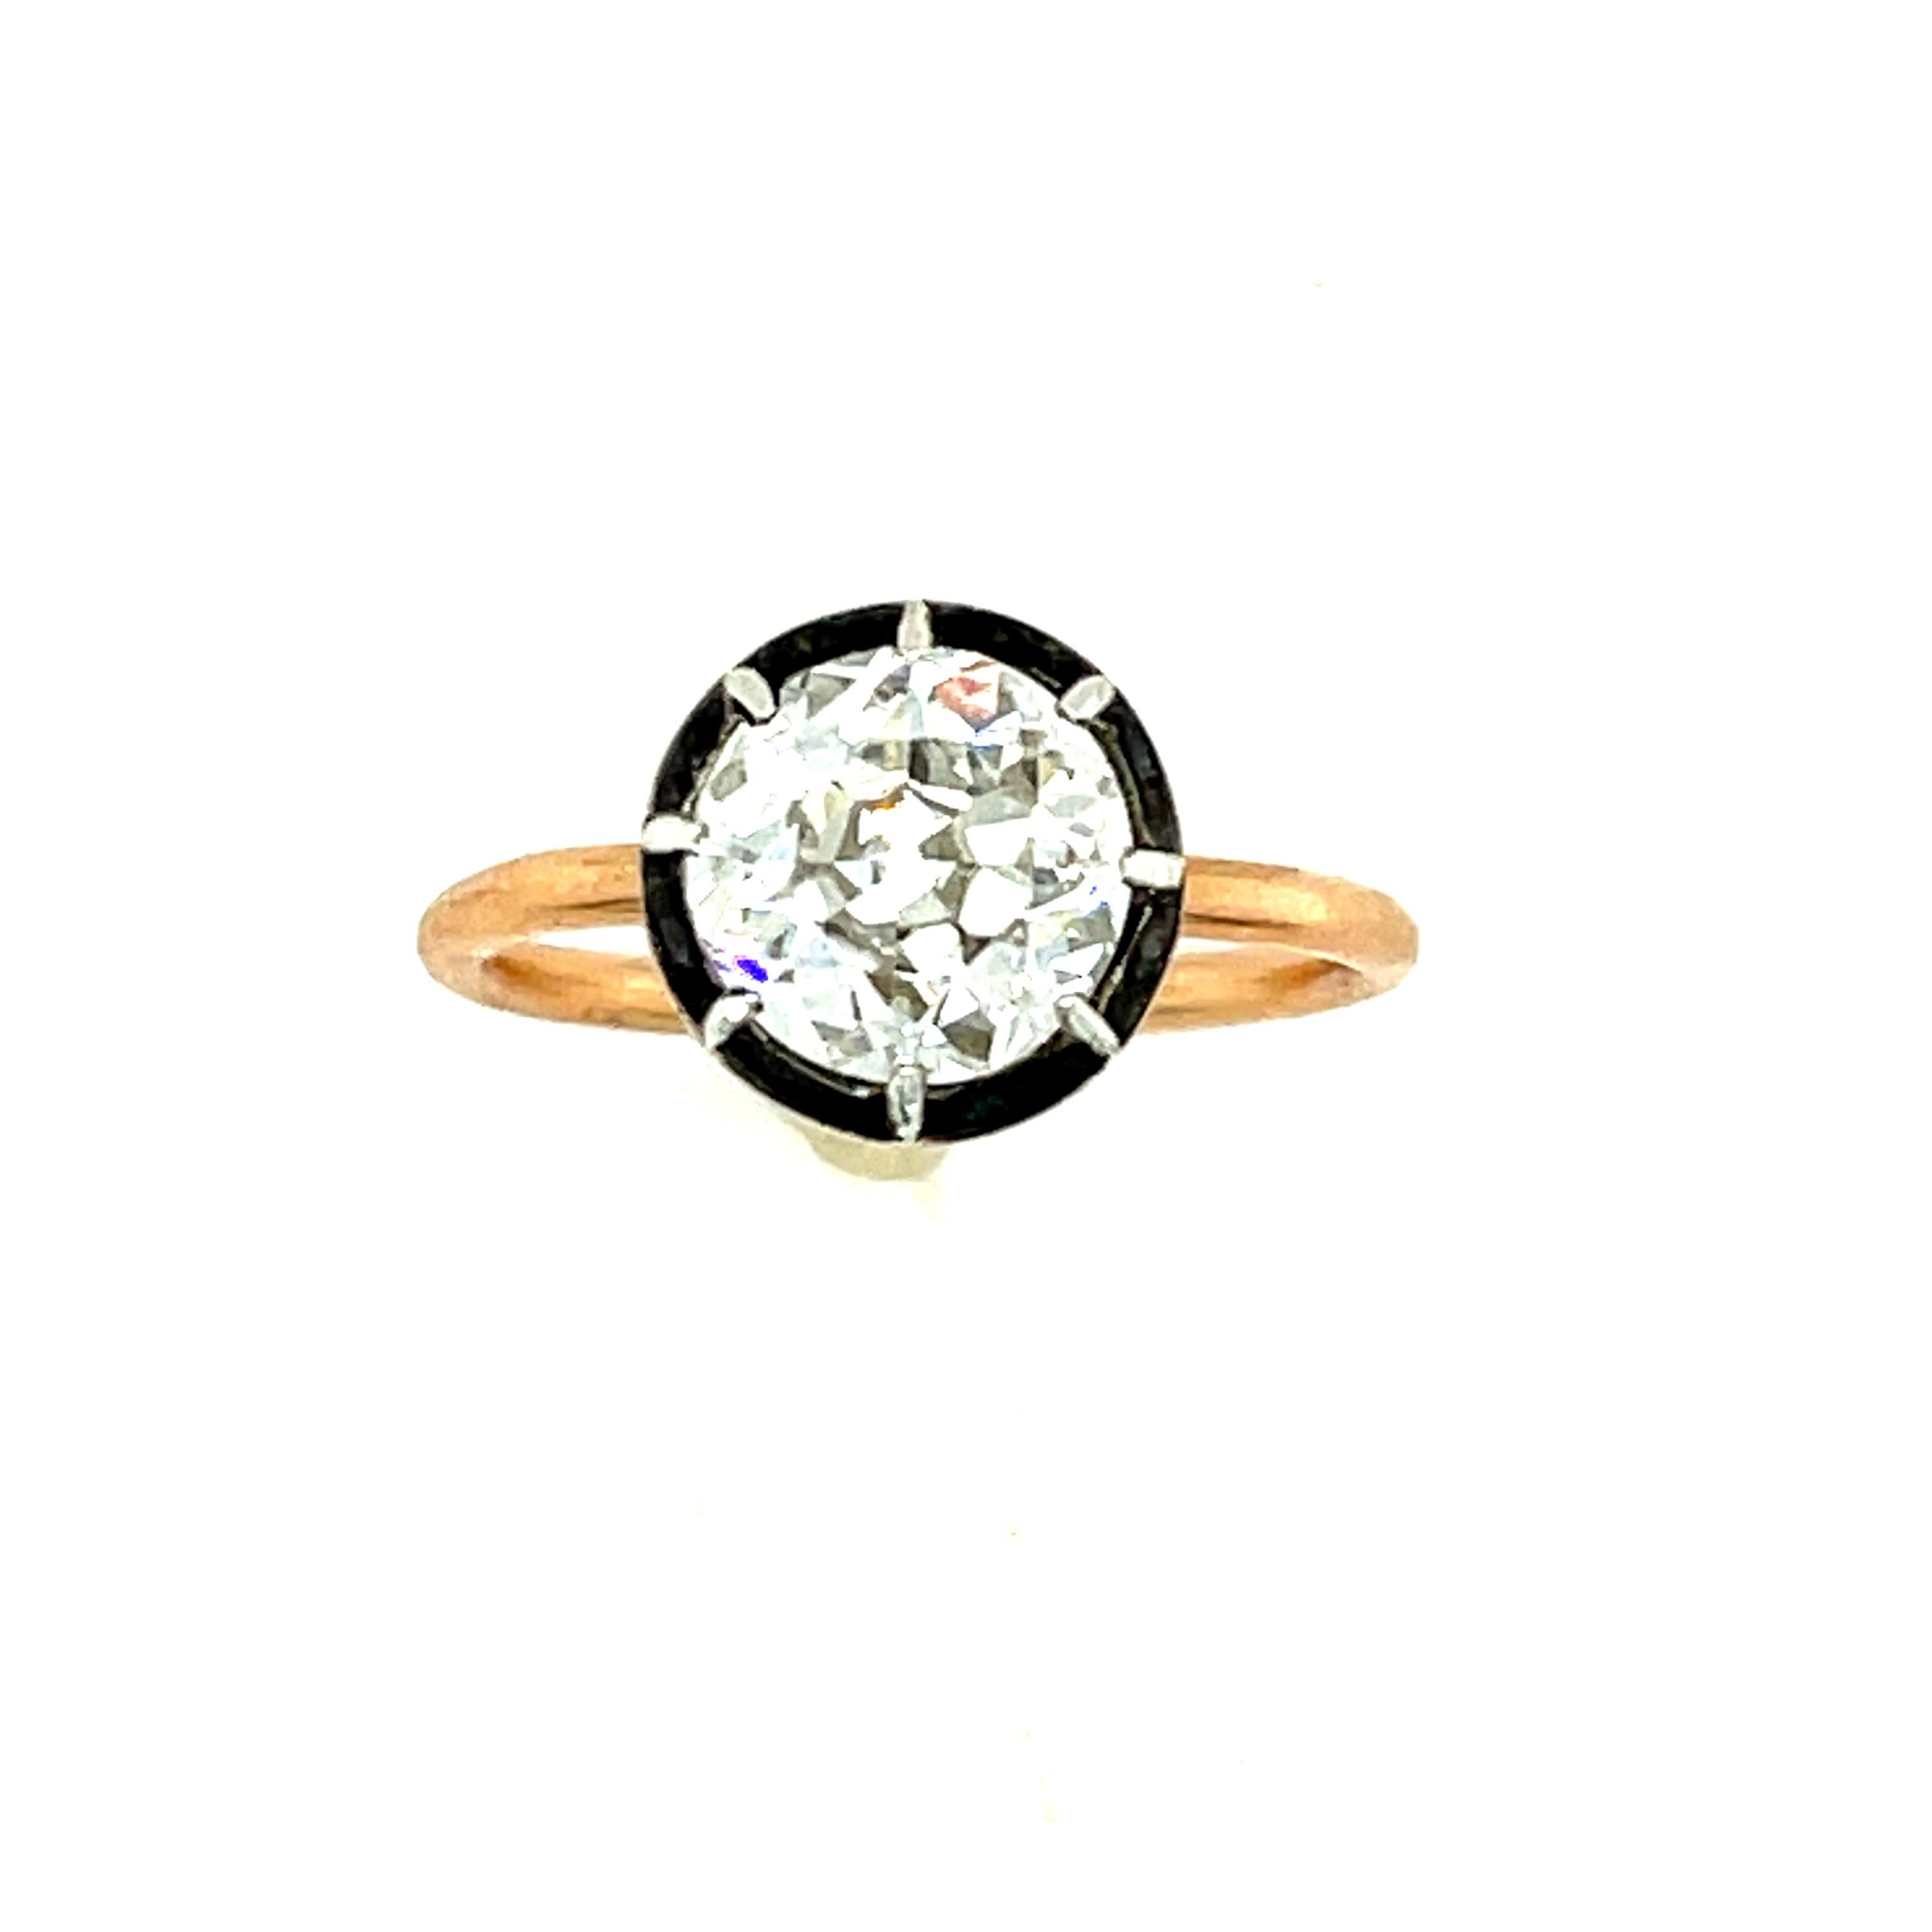 Collet set Old European Cut diamond weighing 1.68 carats set in a blackened gold bezel and 18k rose gold shank. A mix of contemporary and antique, this is a charming ring. The diamond is a beautiful warmer color diamond that faces up white. We